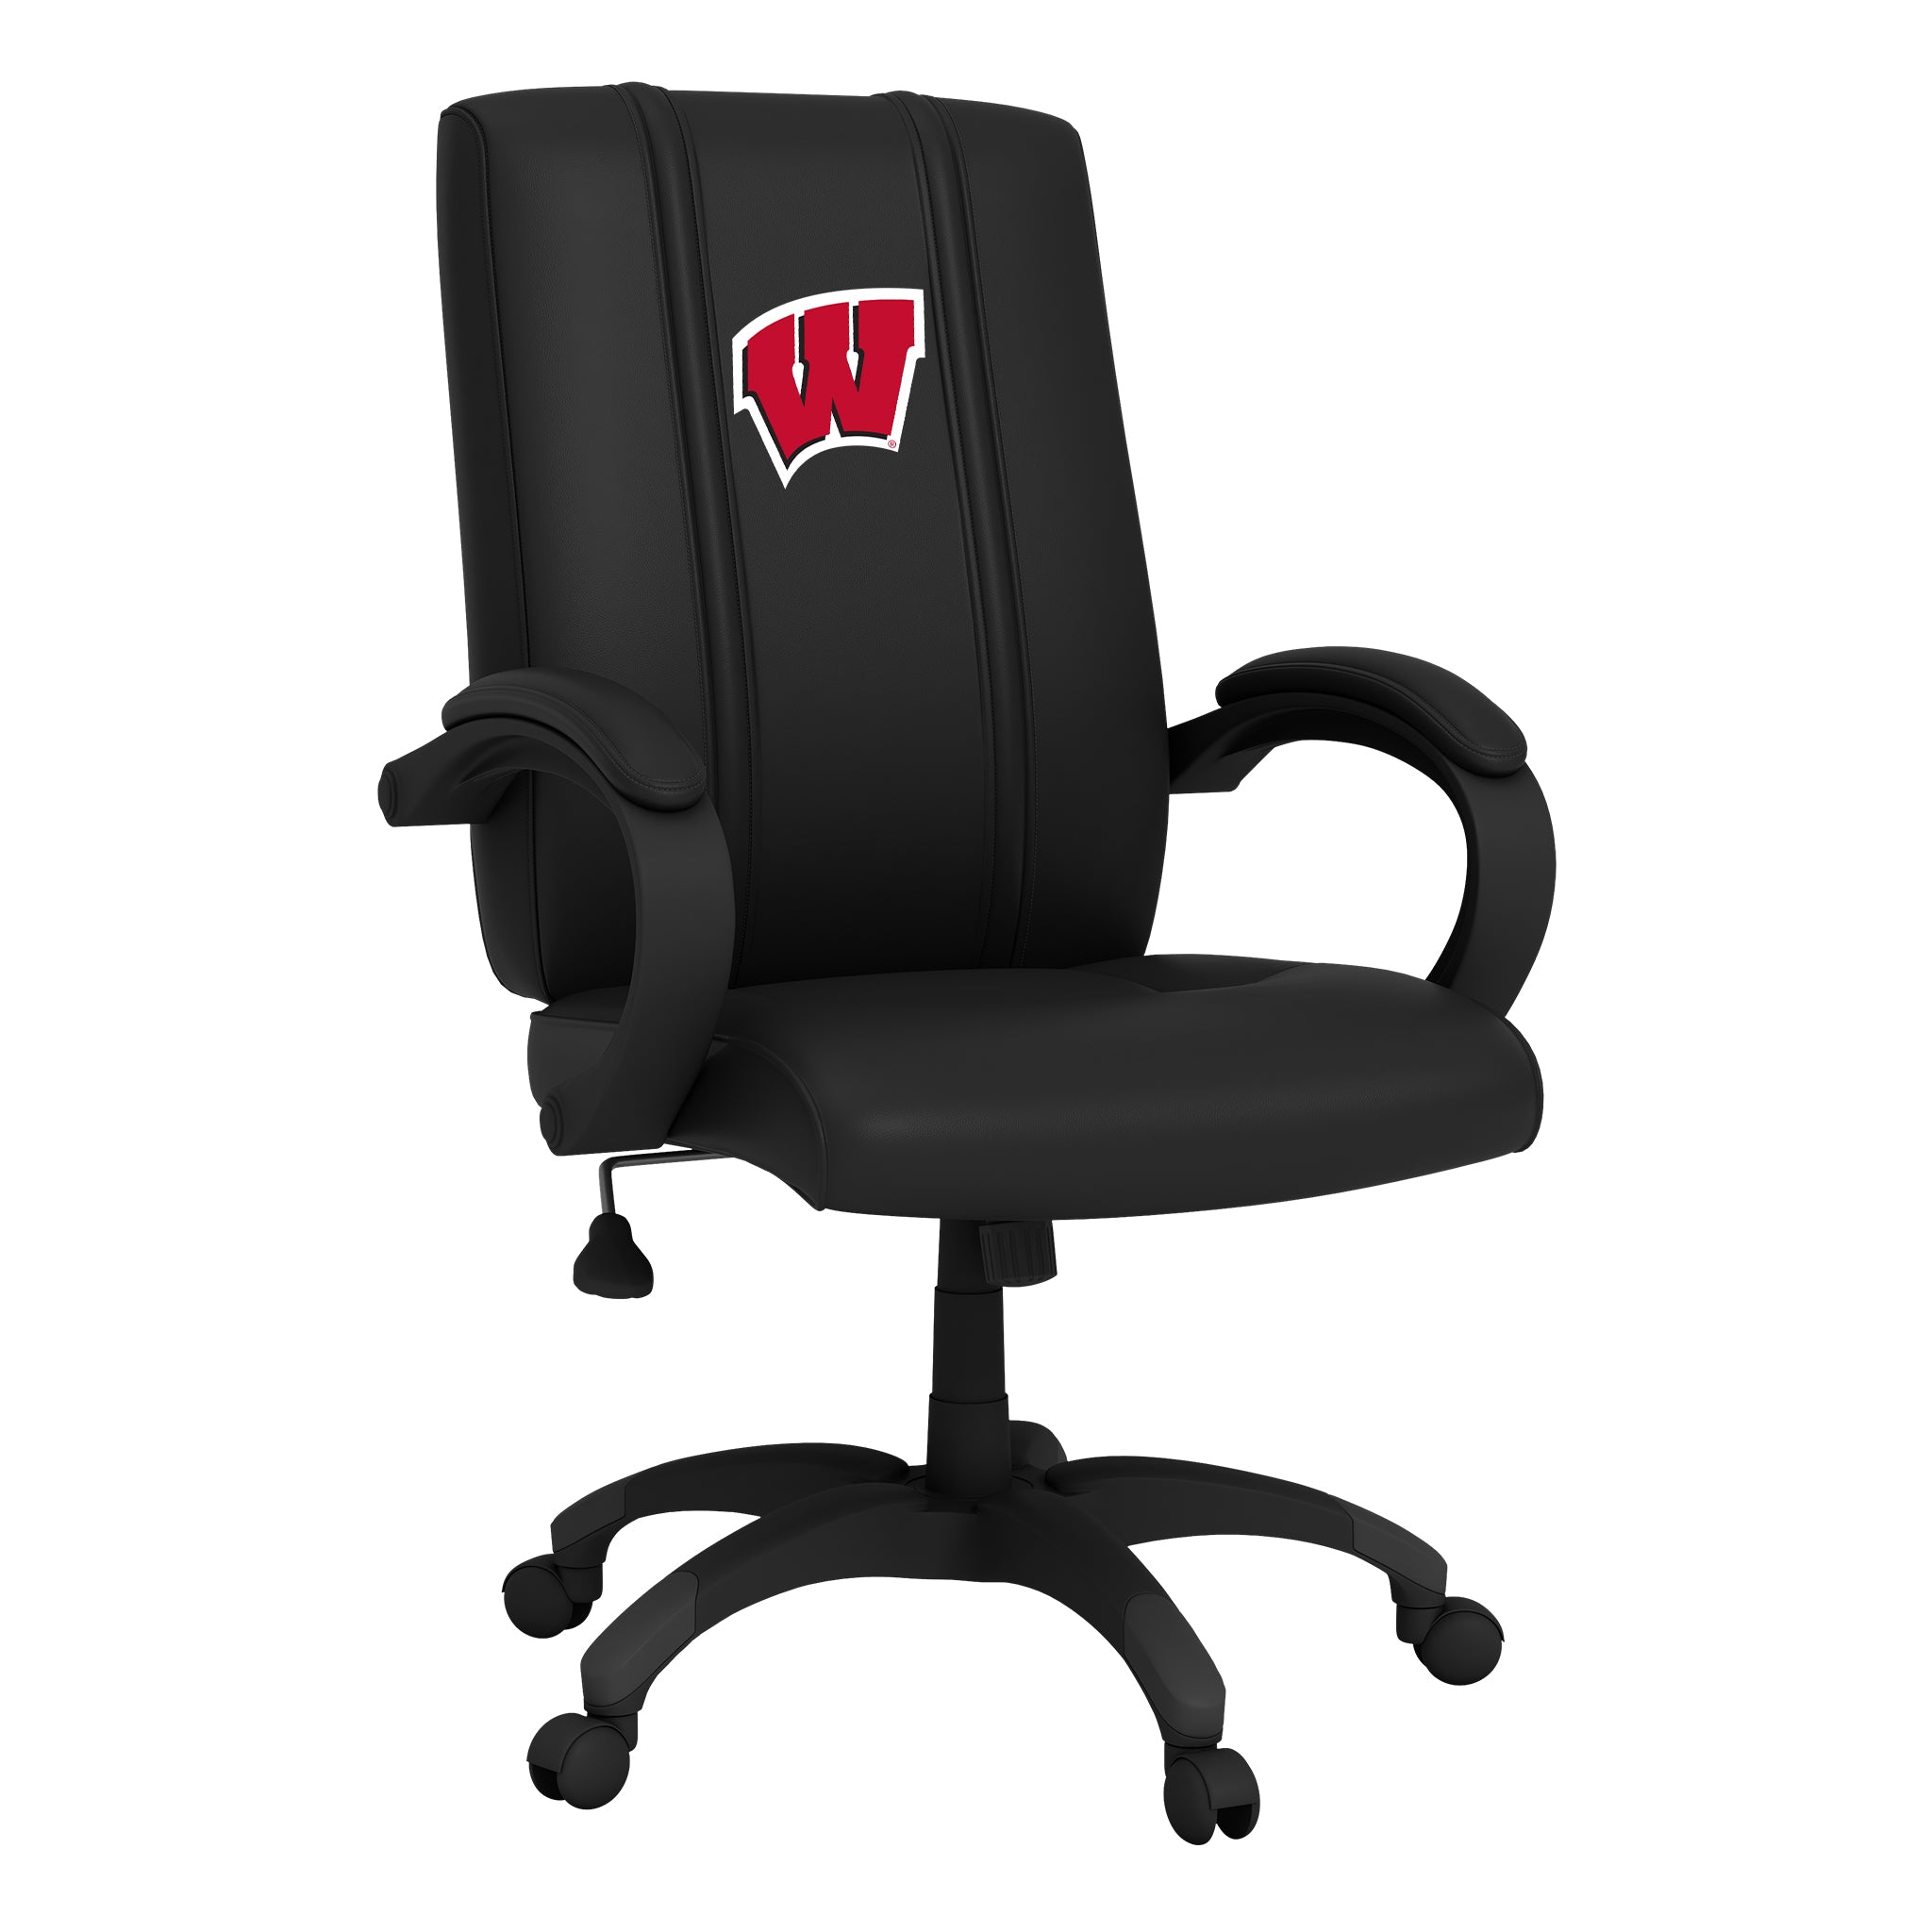 Wisconsin Badgers Office Chair 1000 with Wisconsin Badgers Logo